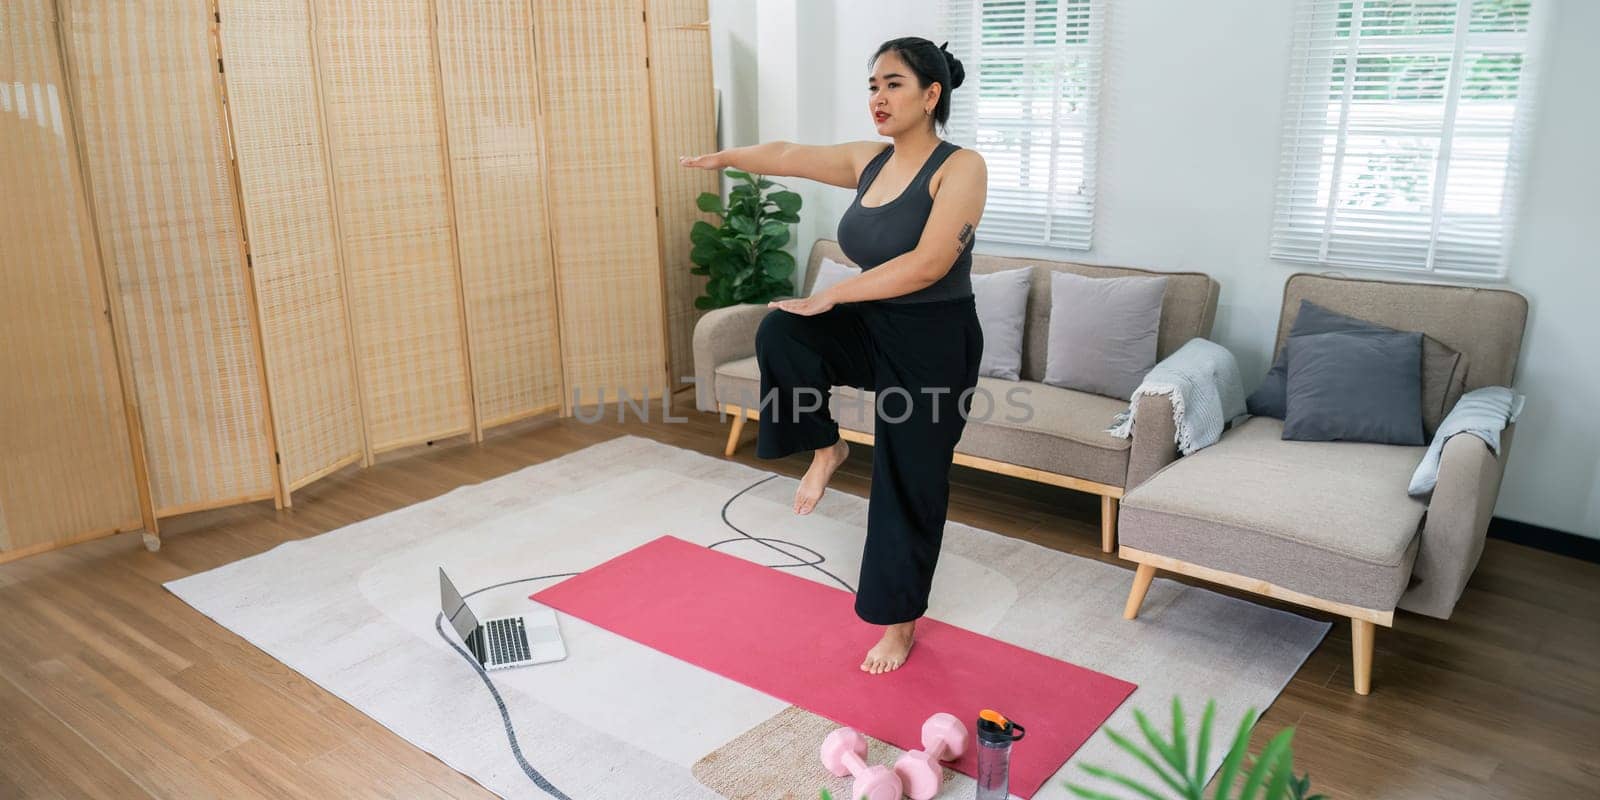 Cheerful attractive young overweight woman in activewear choosing healthy lifestyle.